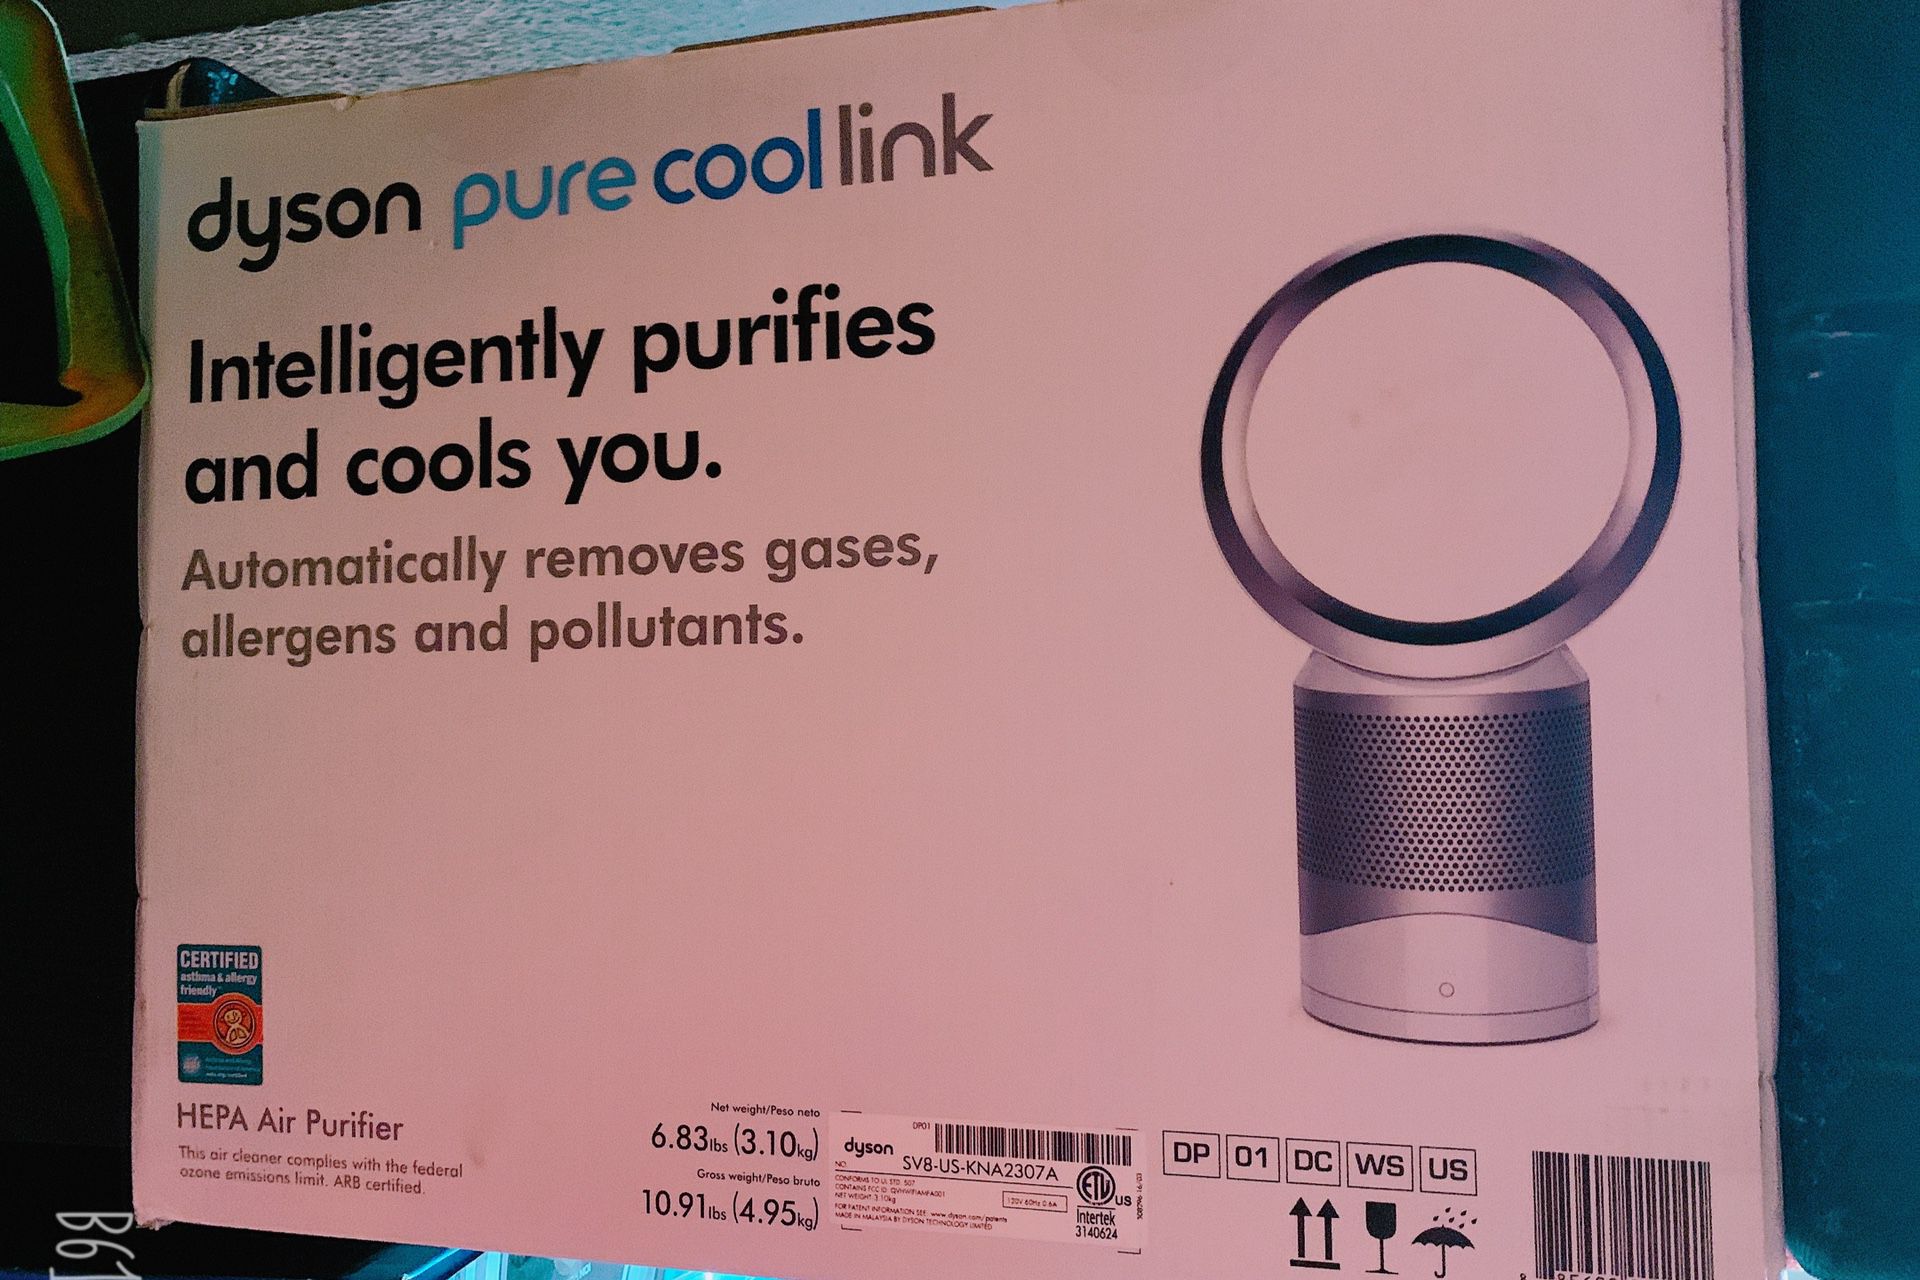 DYSON AIR PURIFIER NEVER OPENED BRAND NEW